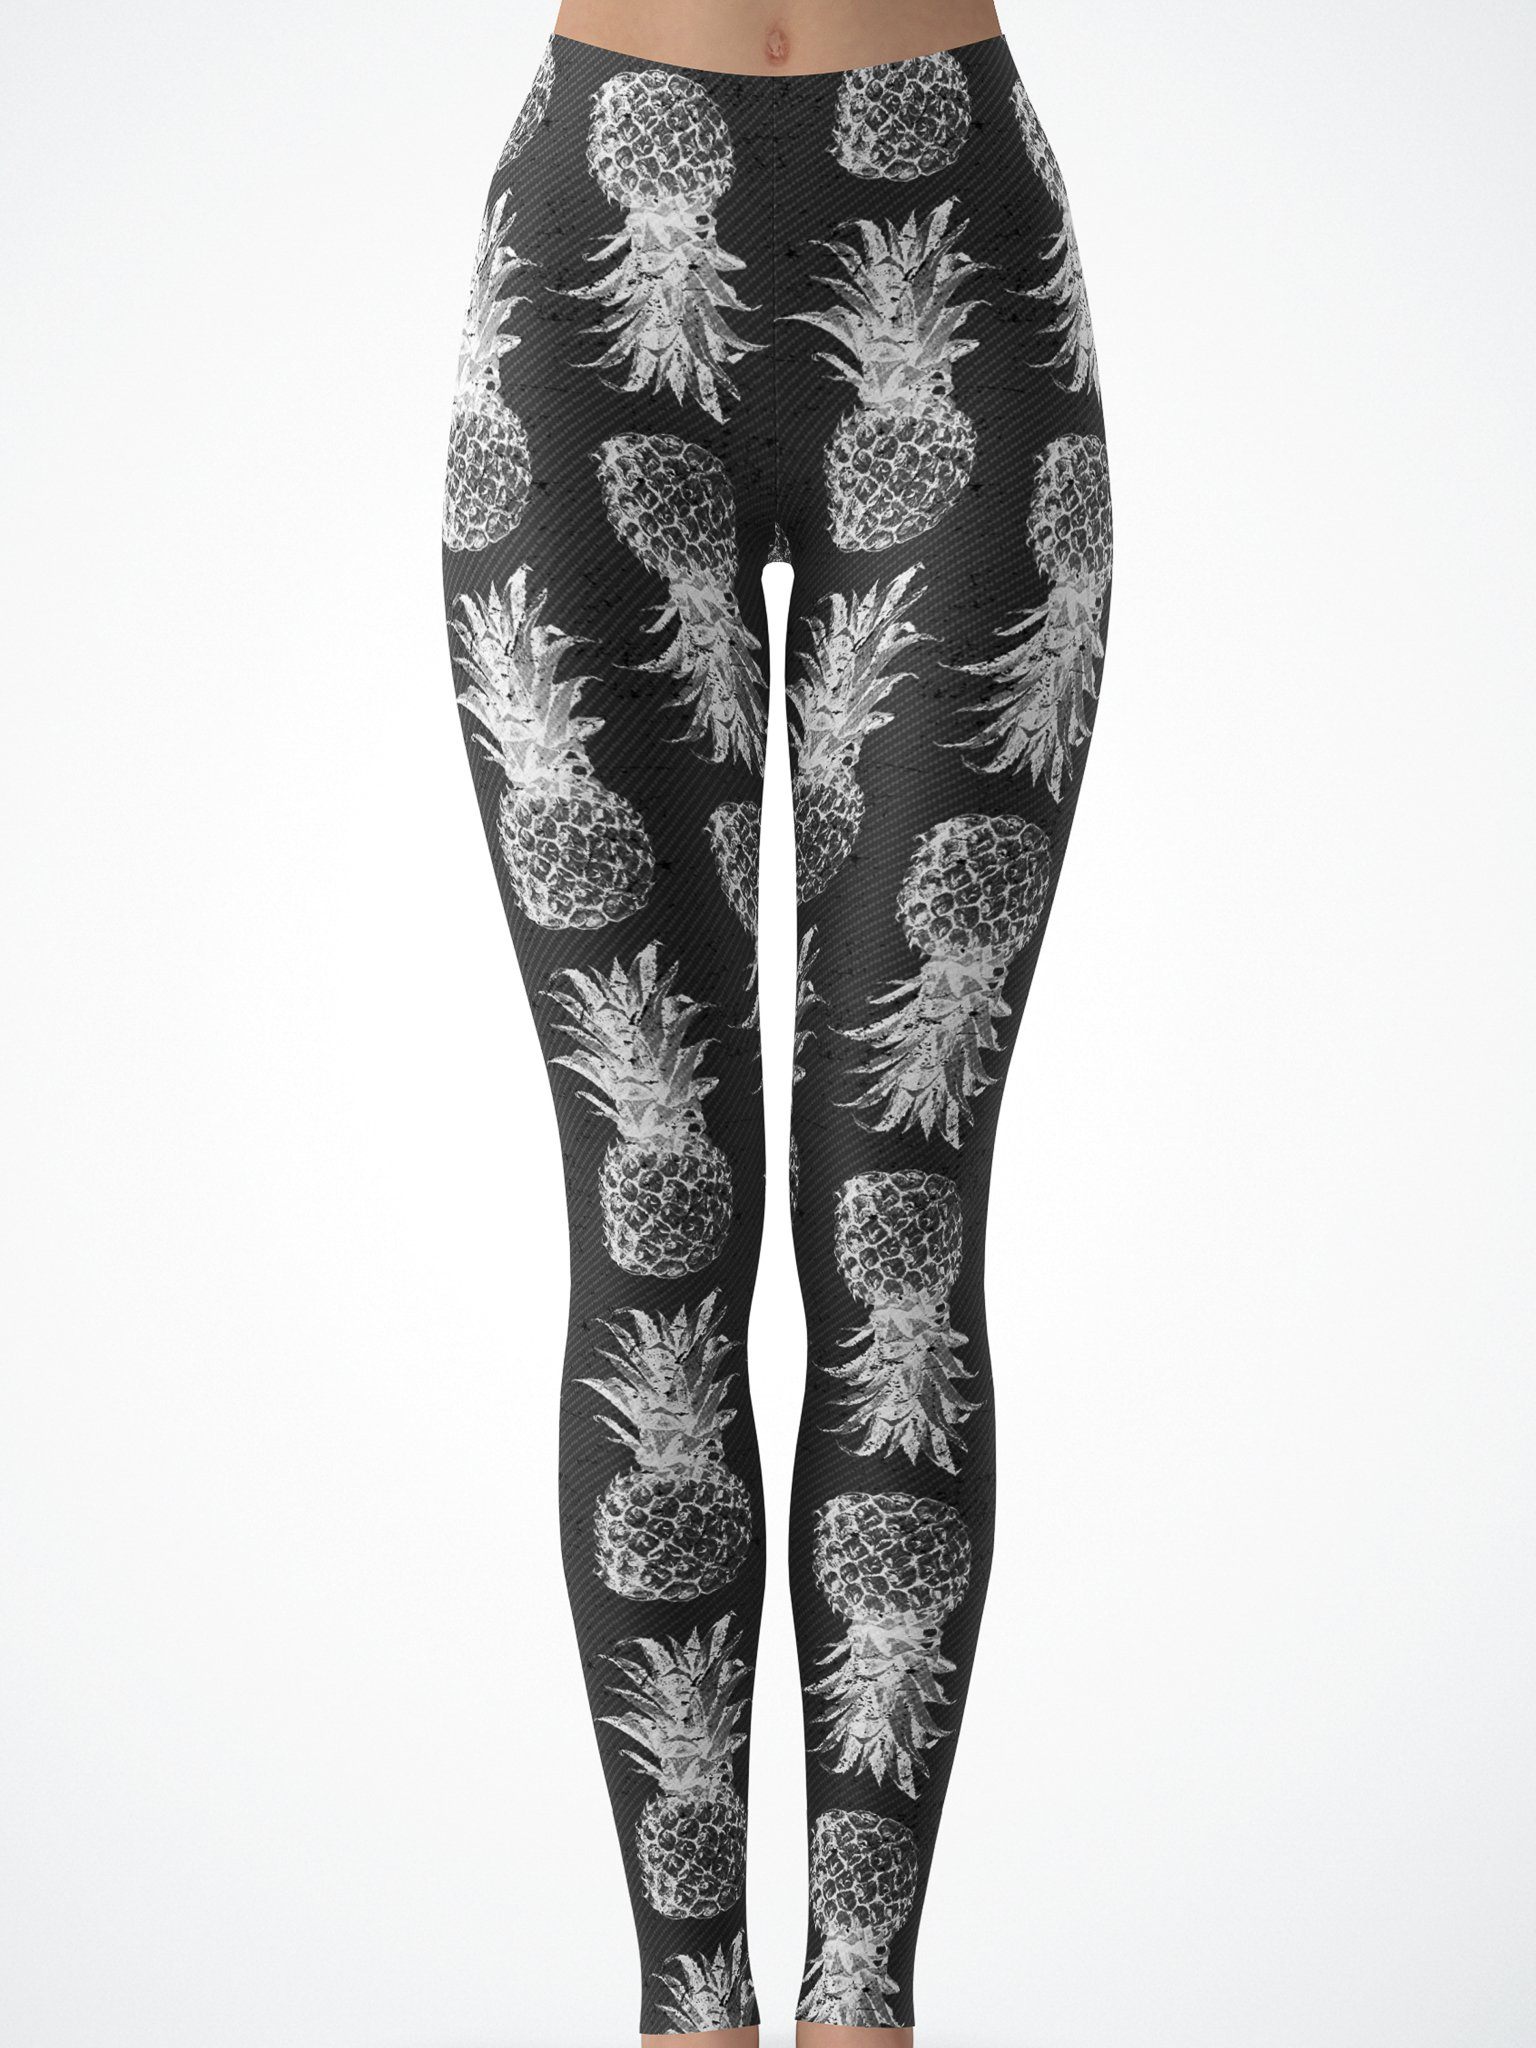 Black and White Pineapple Tights Tights T6 